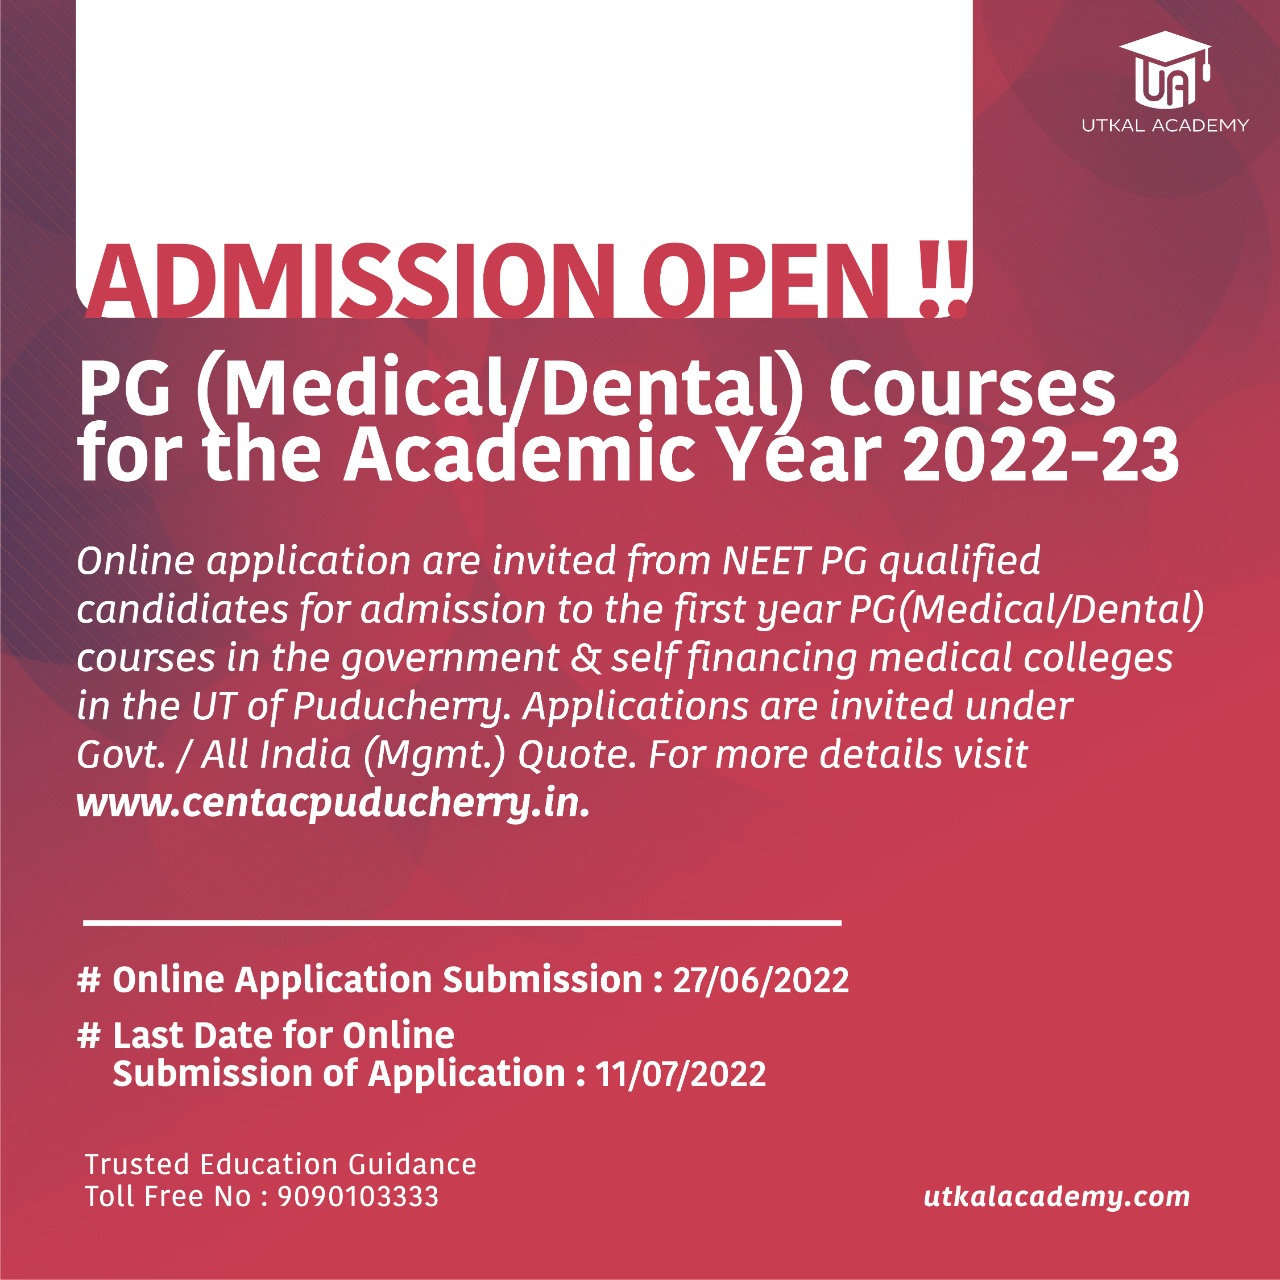 Admission open for PG (Medical/Dental) Courses for the Academic Year 2022-23